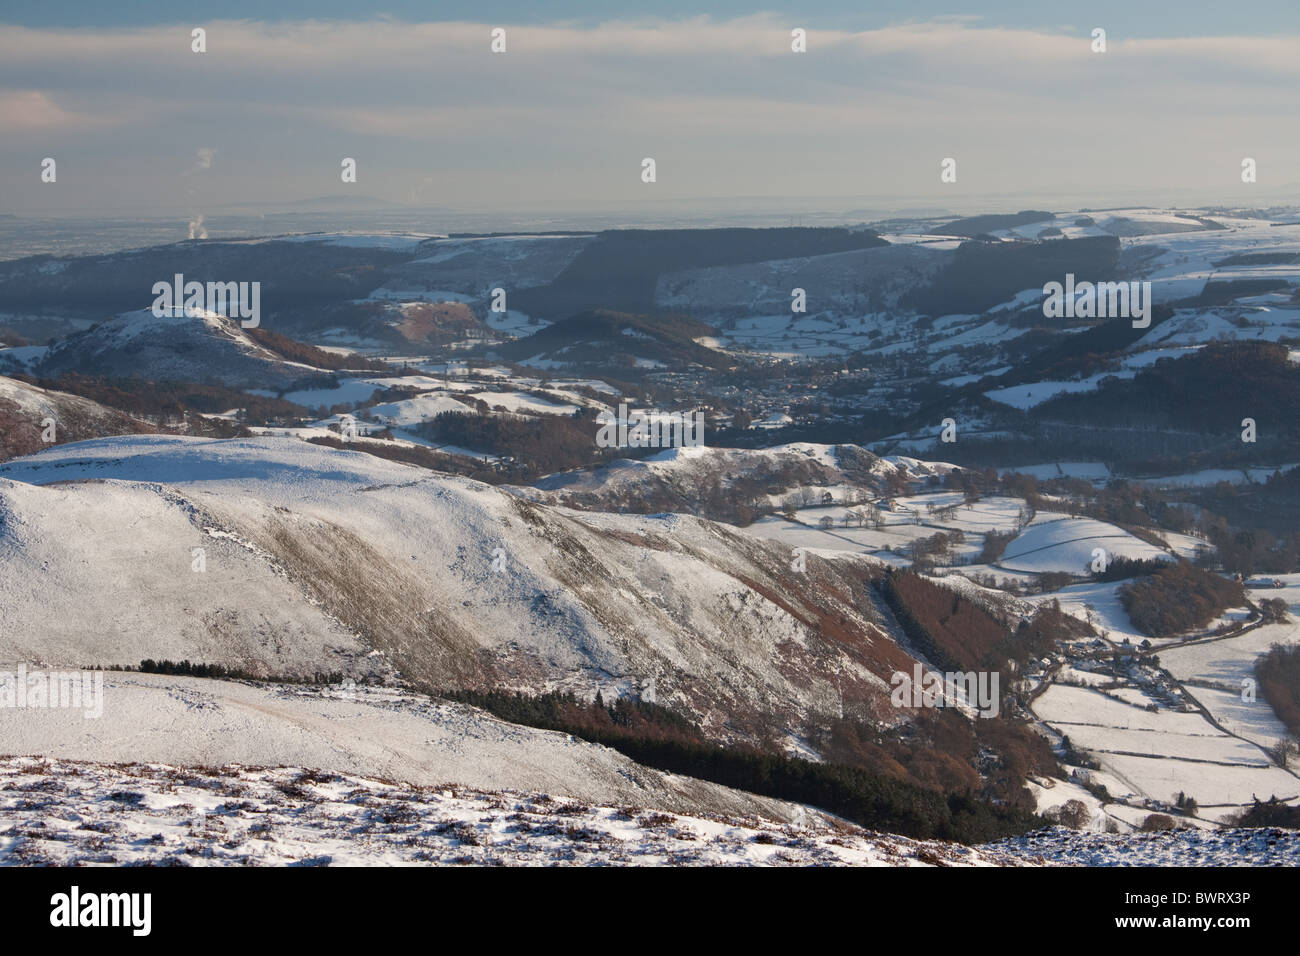 Looking down to the town of Llangollen in North Wales, from the snowy winter slopes of Moel y Gamelin Stock Photo